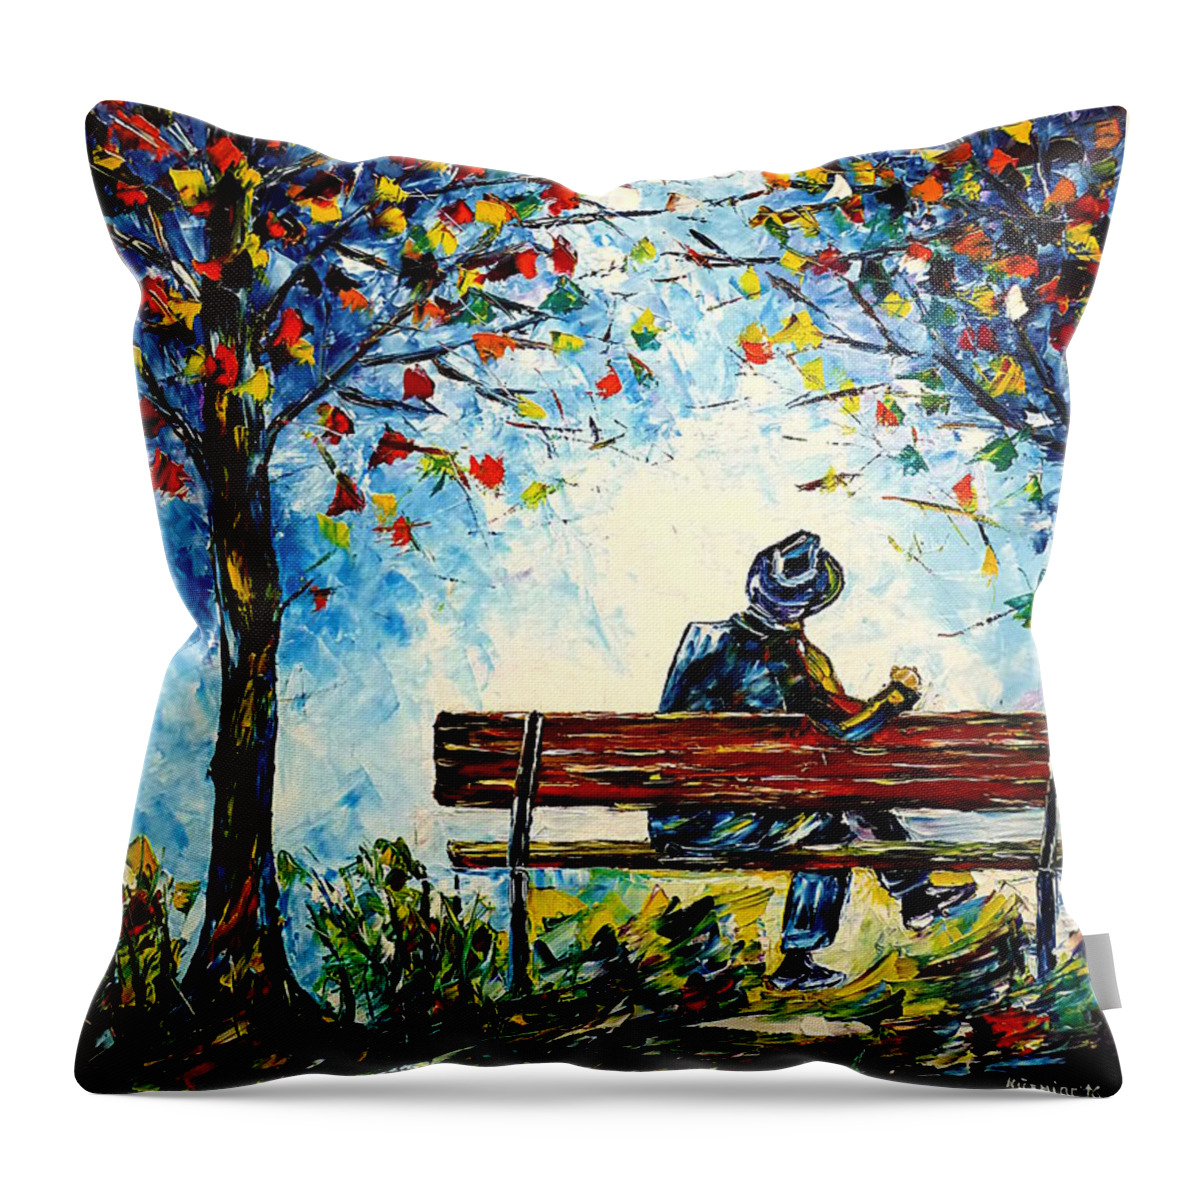 Lonely Man Throw Pillow featuring the painting Alone On A Bench by Mirek Kuzniar